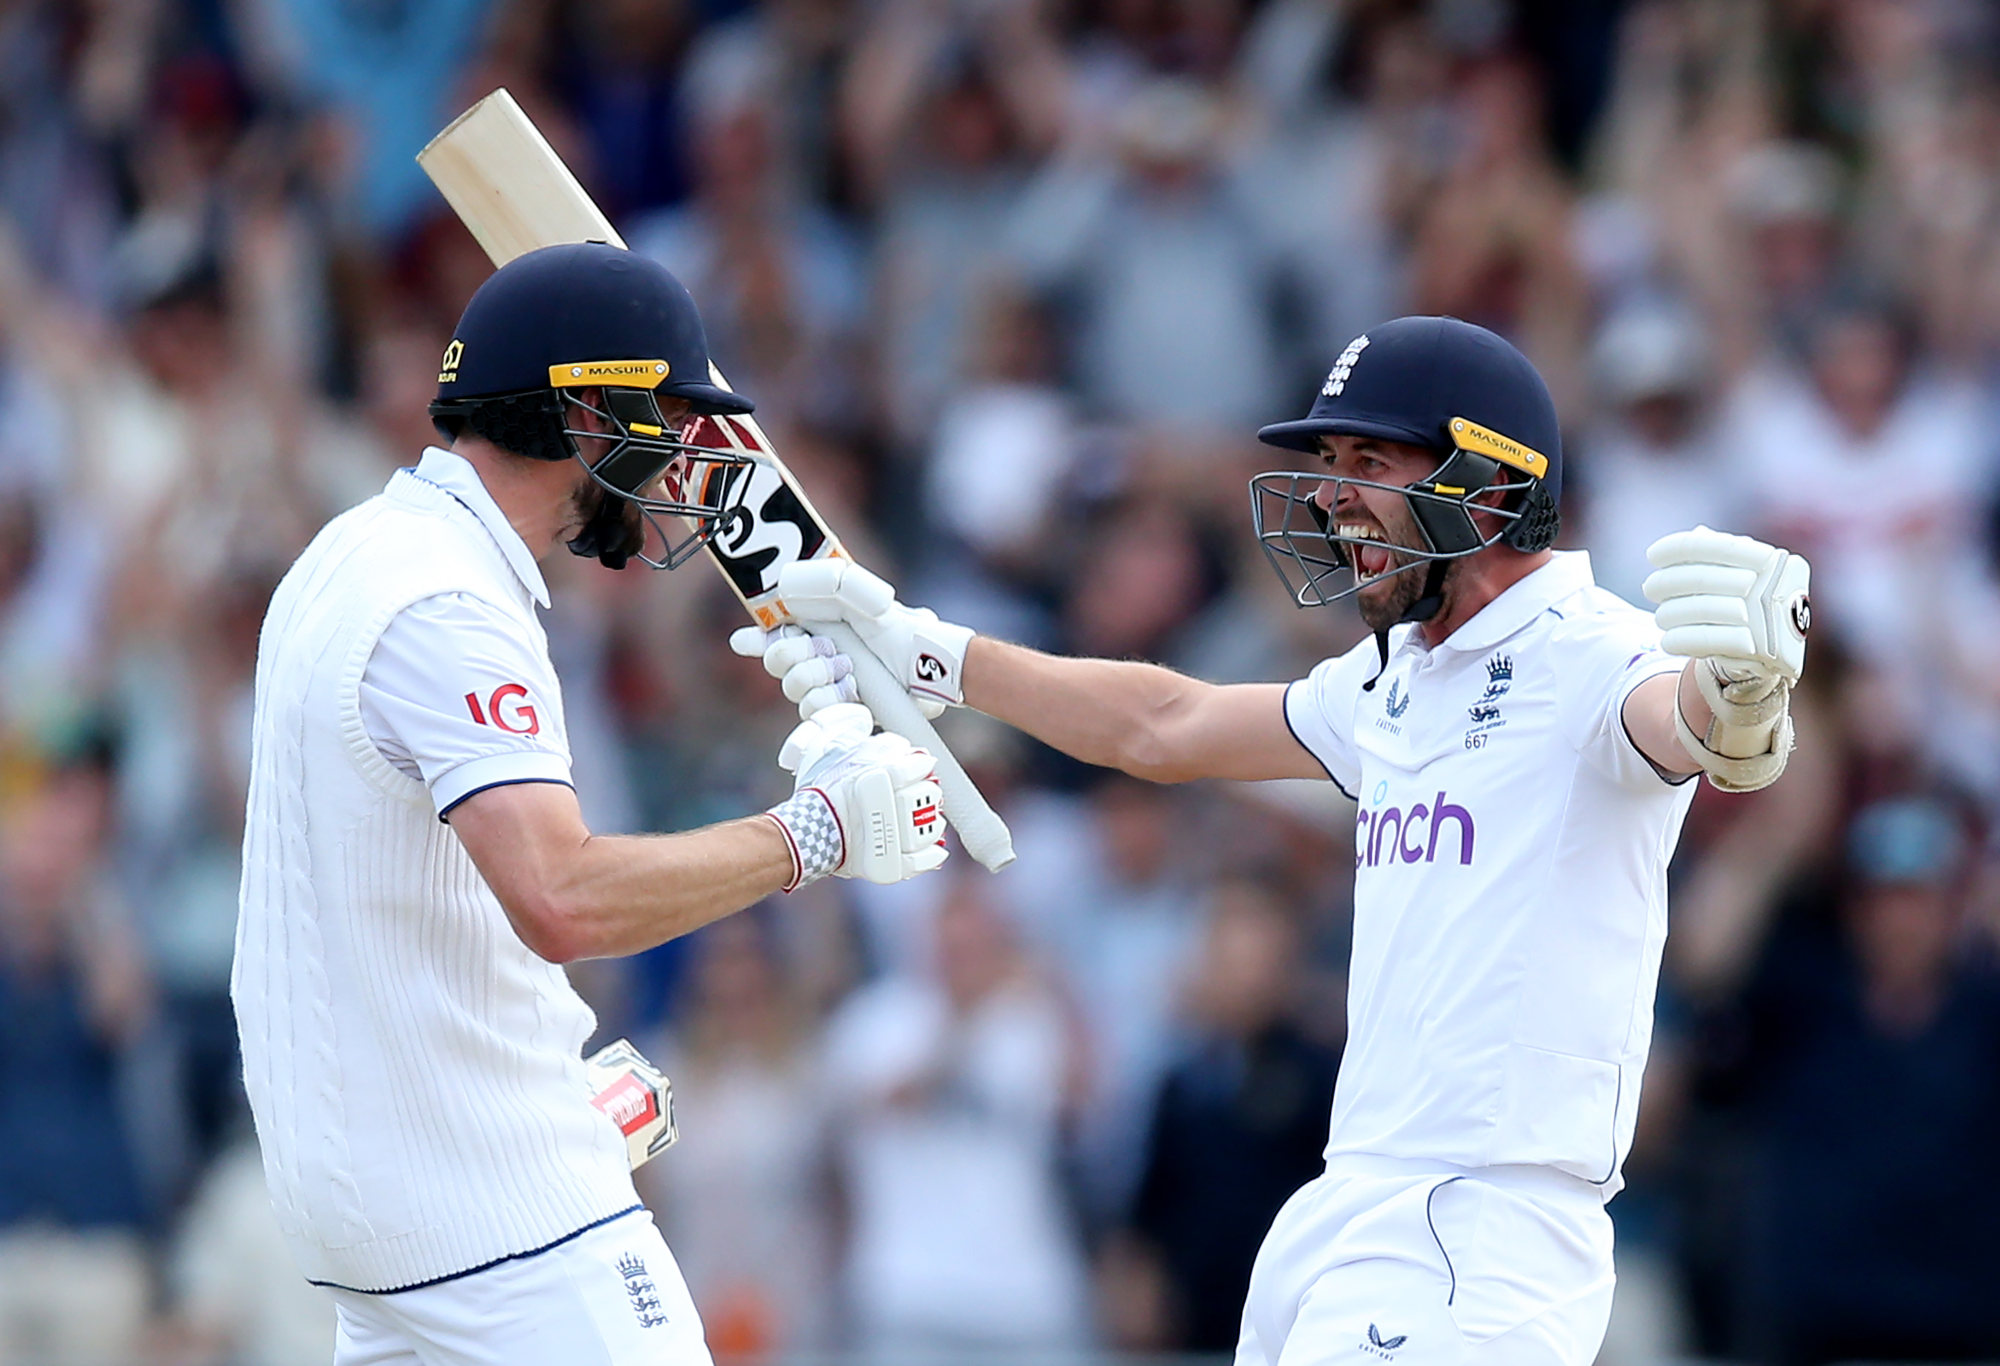 Chris Woakes celebrates with Mark Wood after hitting the winning runs.